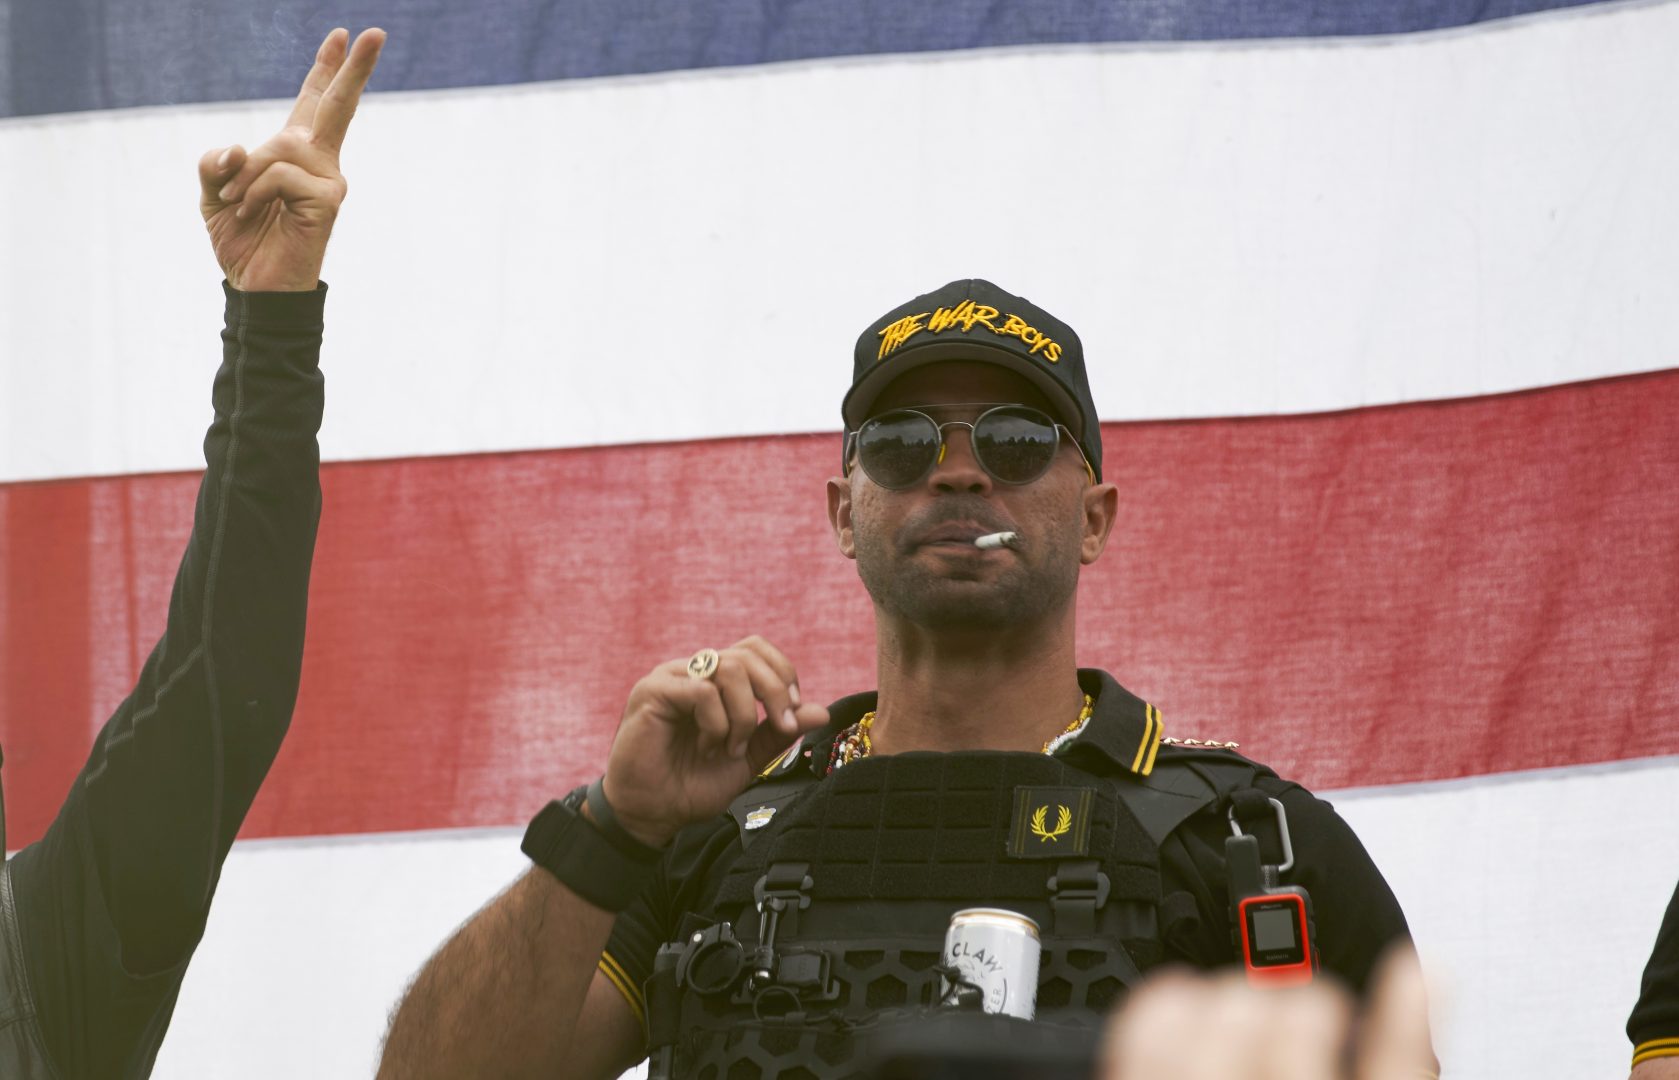 Proud Boys leader Enrique Tarrio wears a hat that says The War Boys and smokes a cigarette at a rally in Delta Park on Sept. 26, 2020, in Portland, Ore.